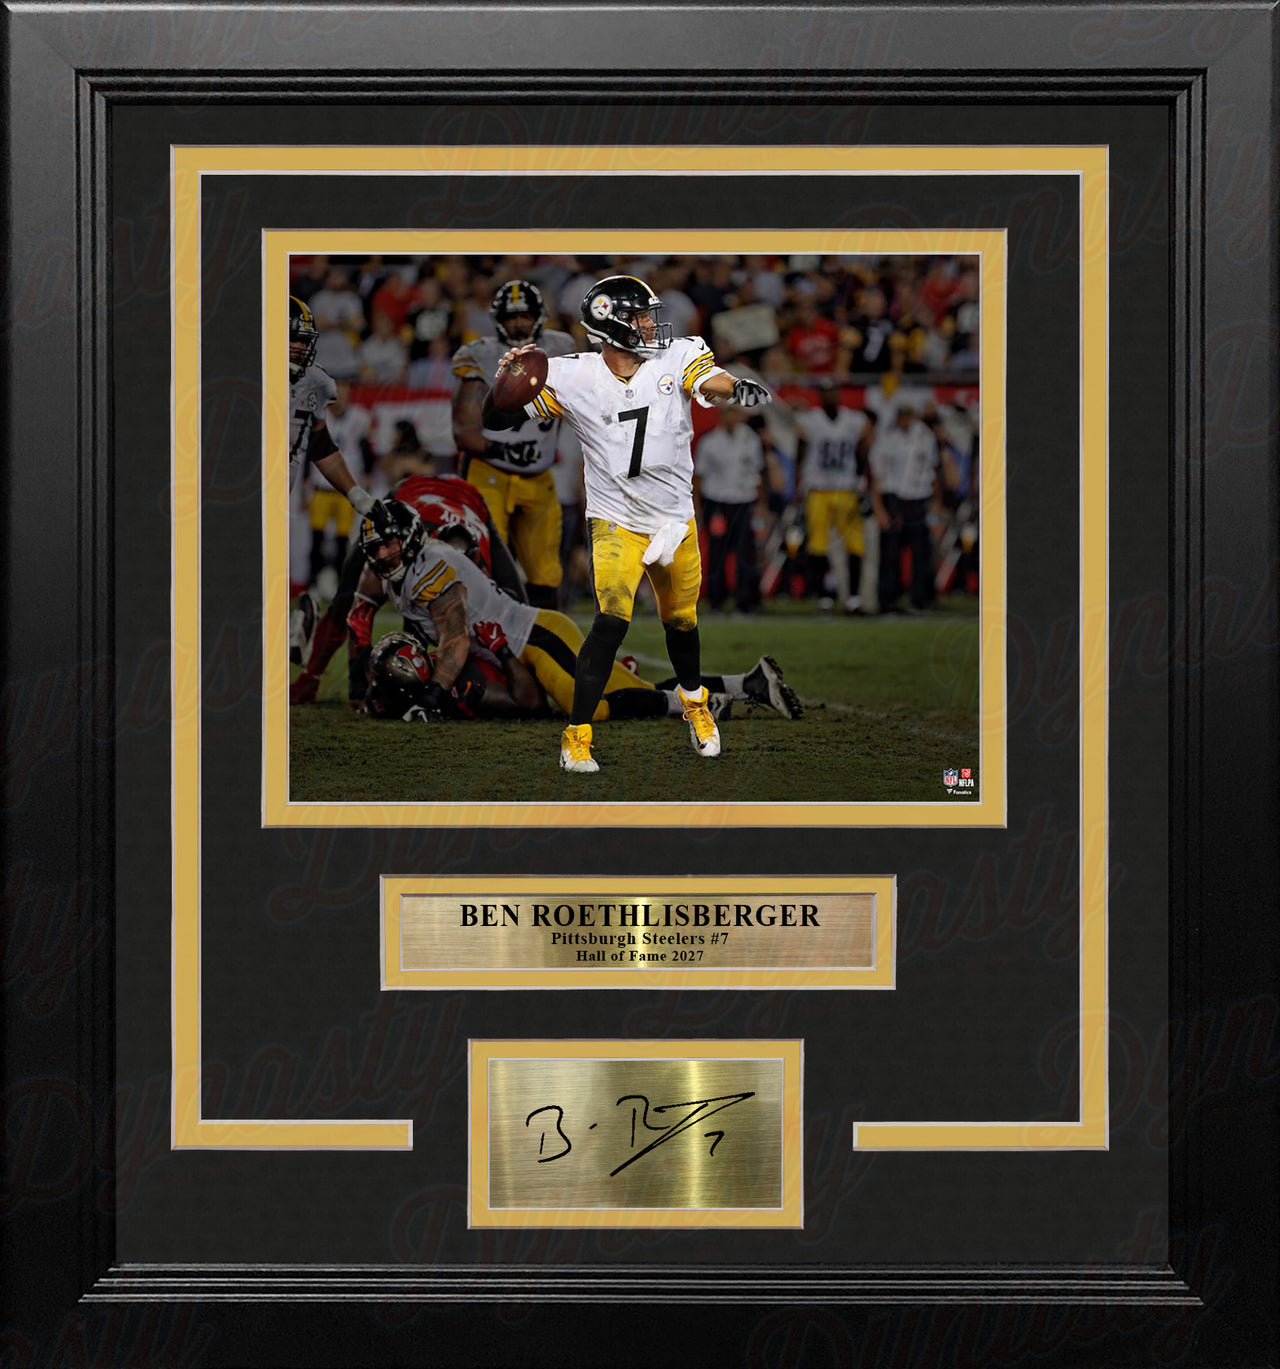 Ben Roethlisberger Blackout Pittsburgh Steelers 8x10 Framed Football Photo with Engraved Autograph